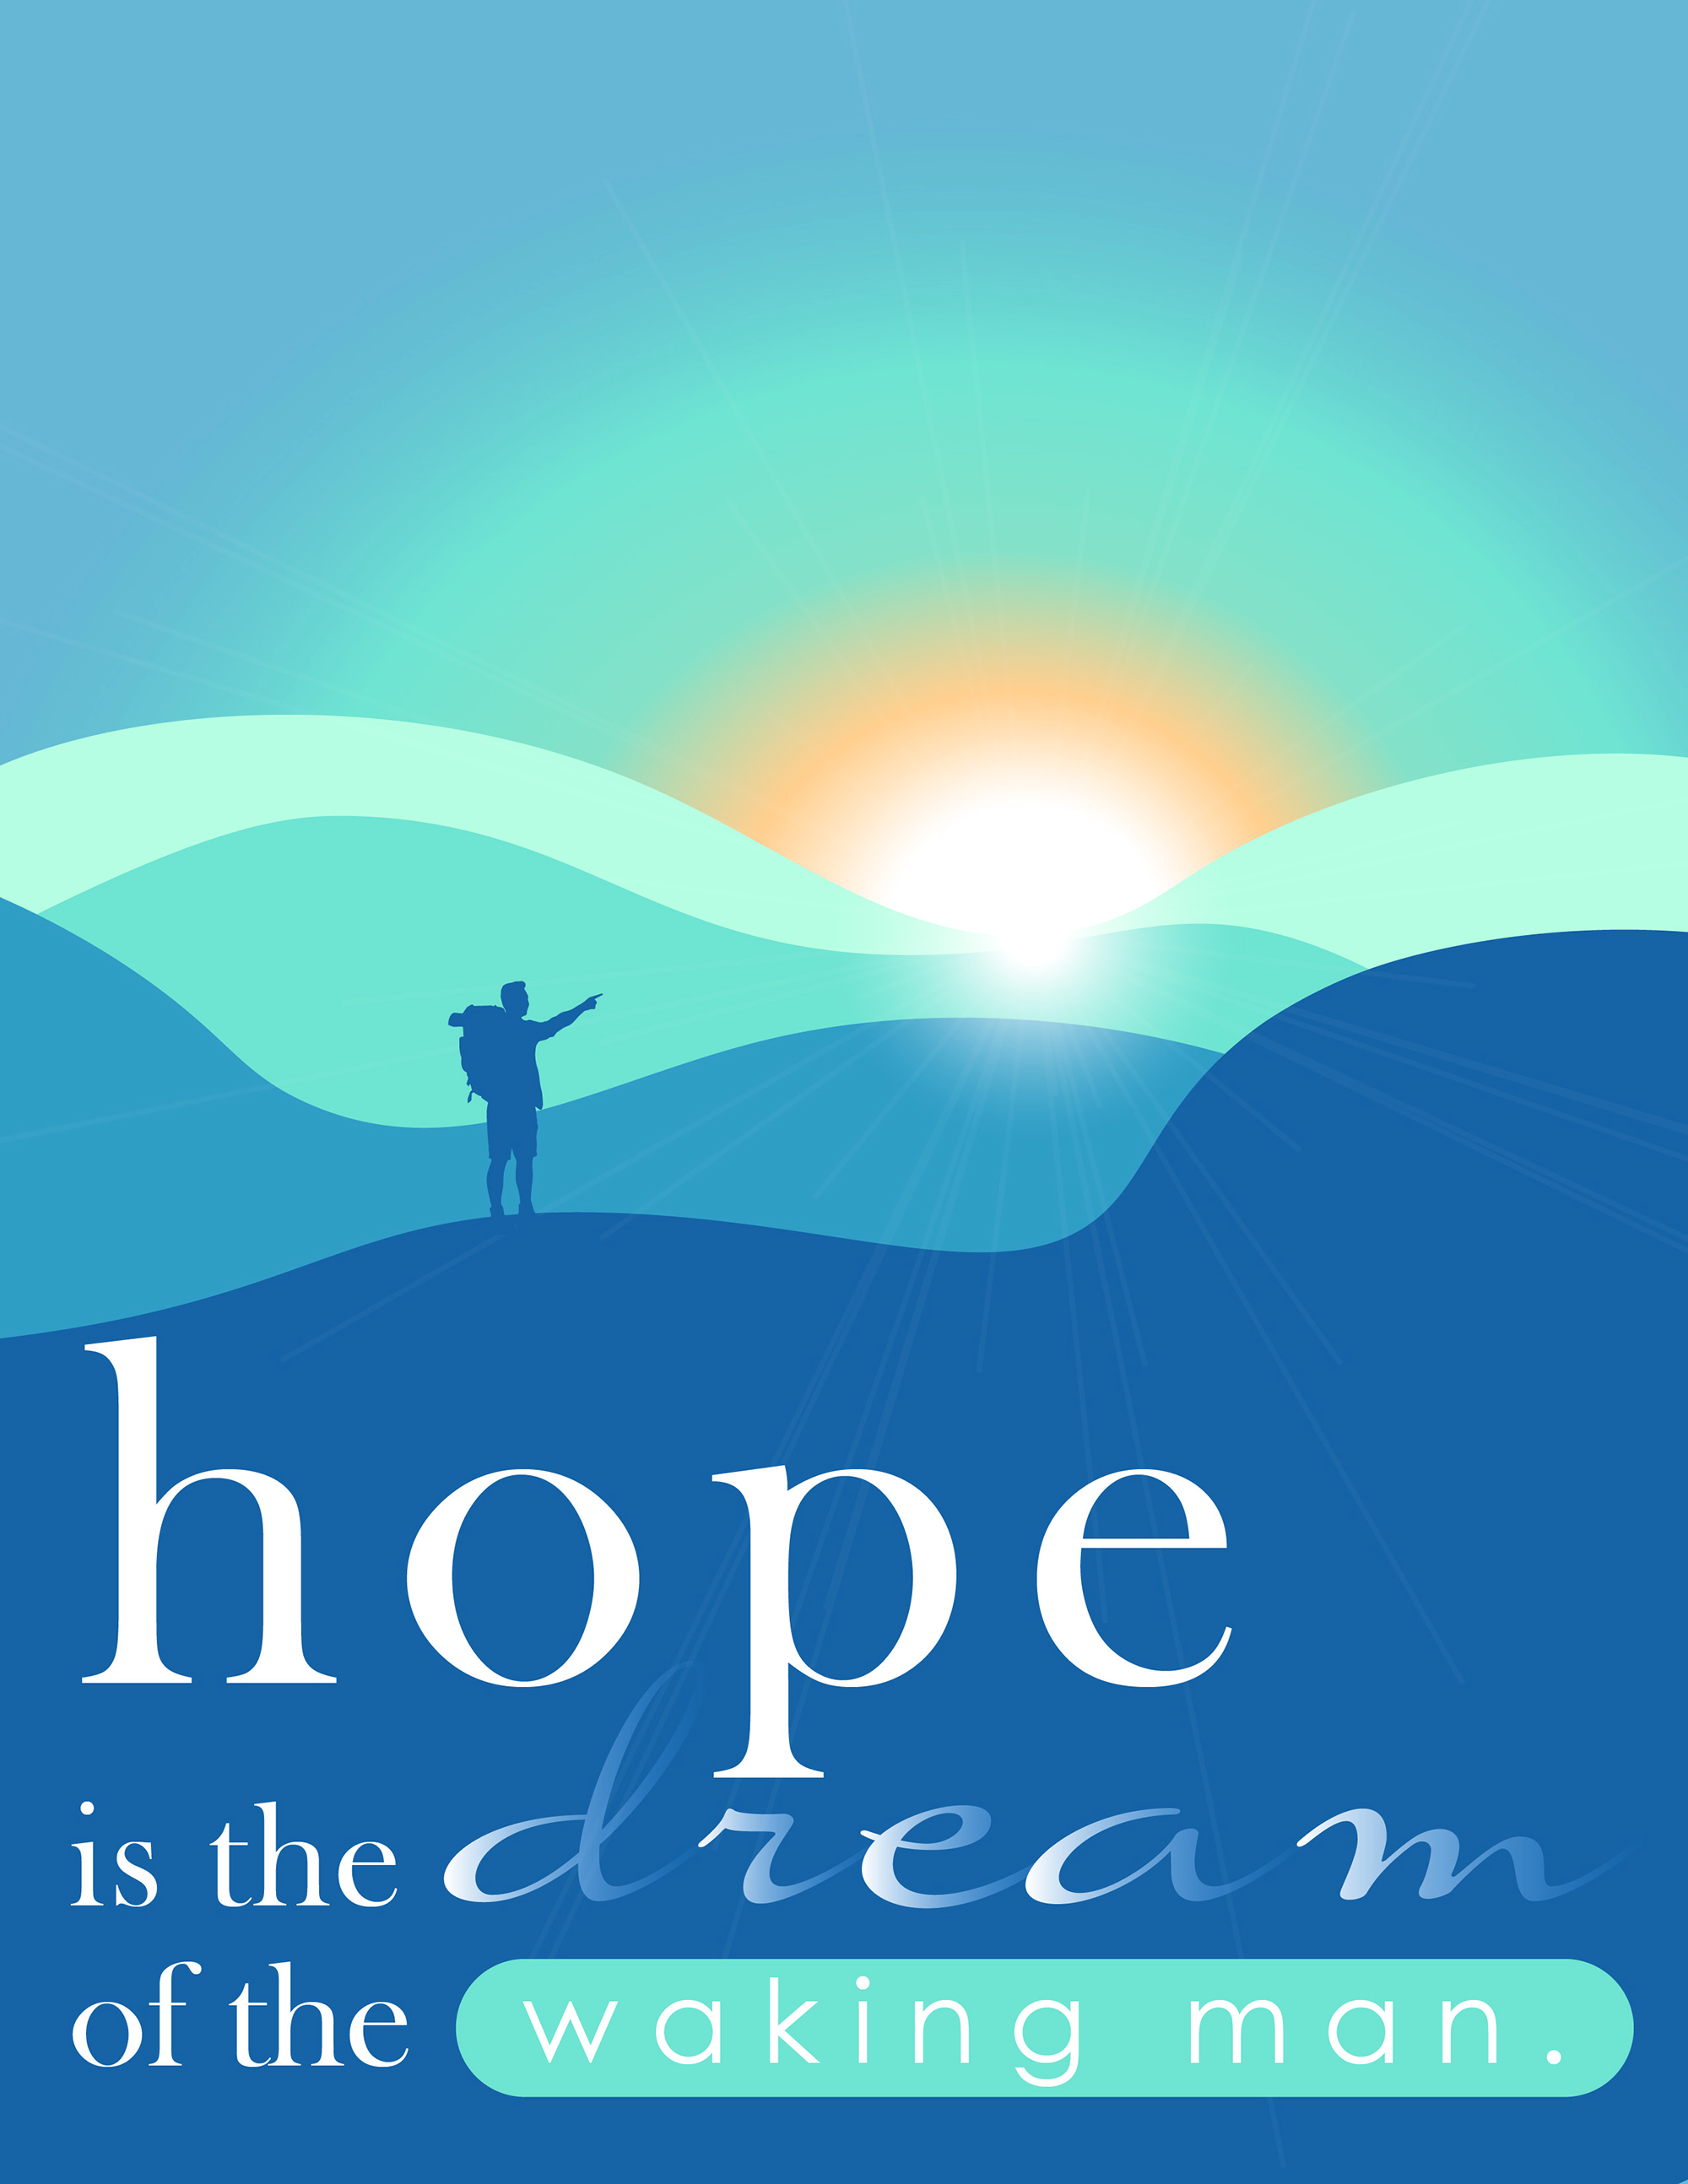 <b>Hope is the dream of the waking man</b><br>
      <i>Created using Illustrator.</i><br> 
      Inspired by the journey between hope and accomplishment, this dream-like image was created as a visual emphasis for the quote.<p></p>